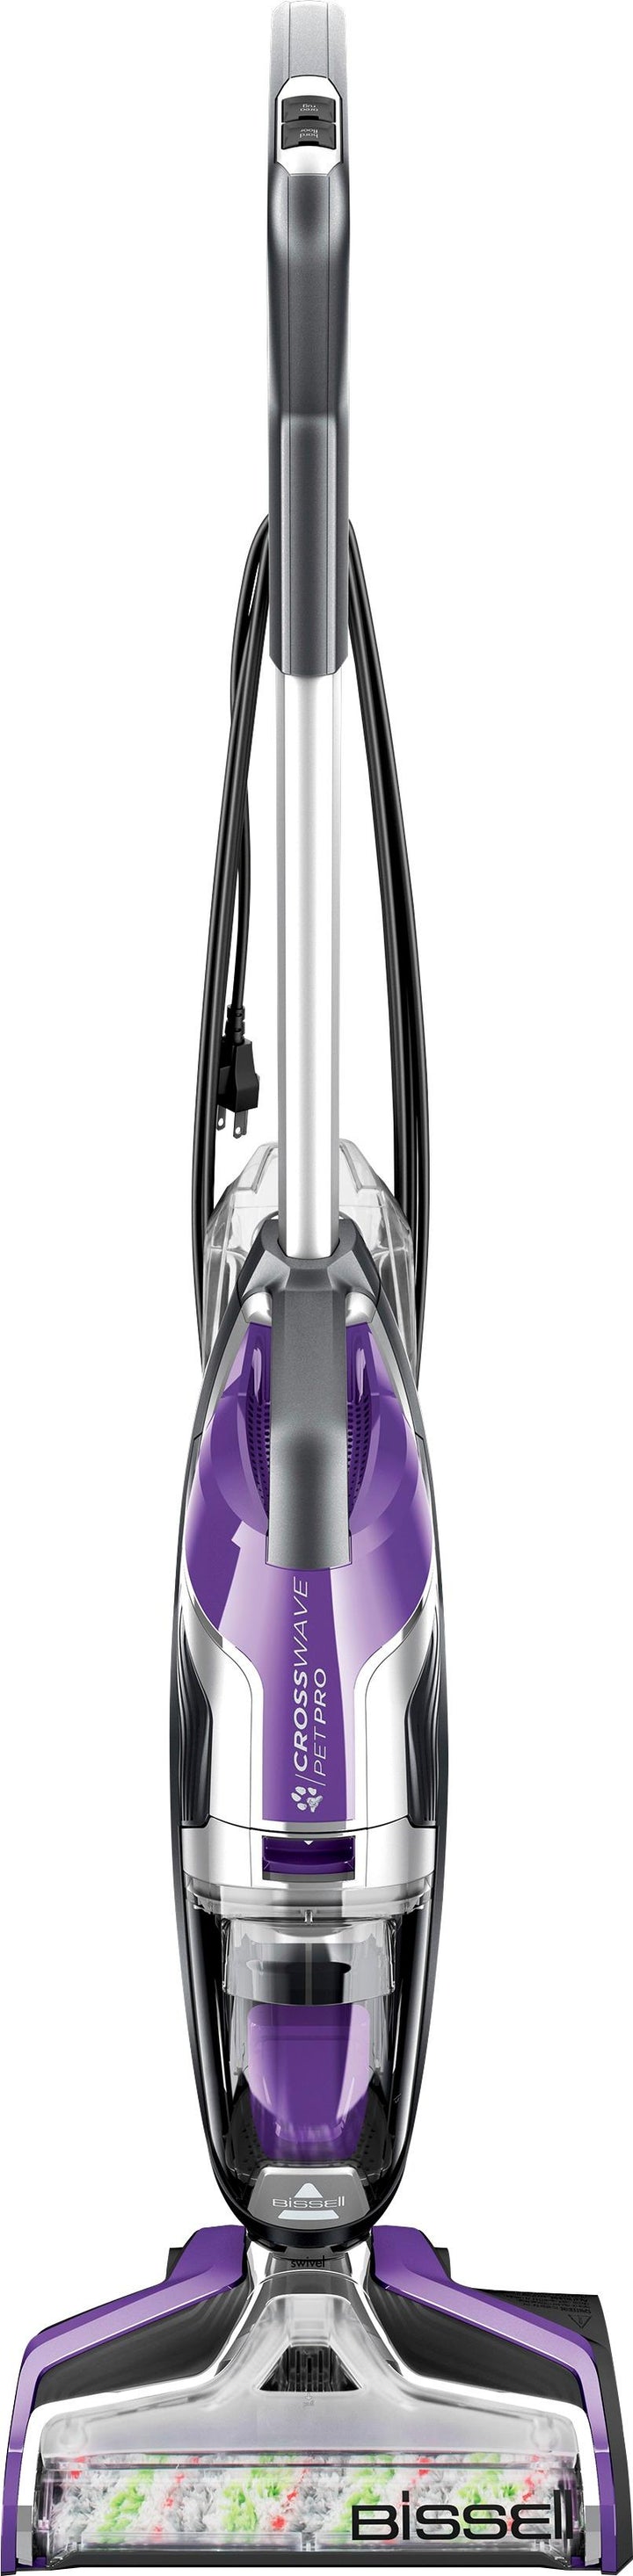 BISSELL - CrossWave Pet Pro All-in-One Multi-Surface Cleaner - Grapevine Purple and Sparkle Silver_0